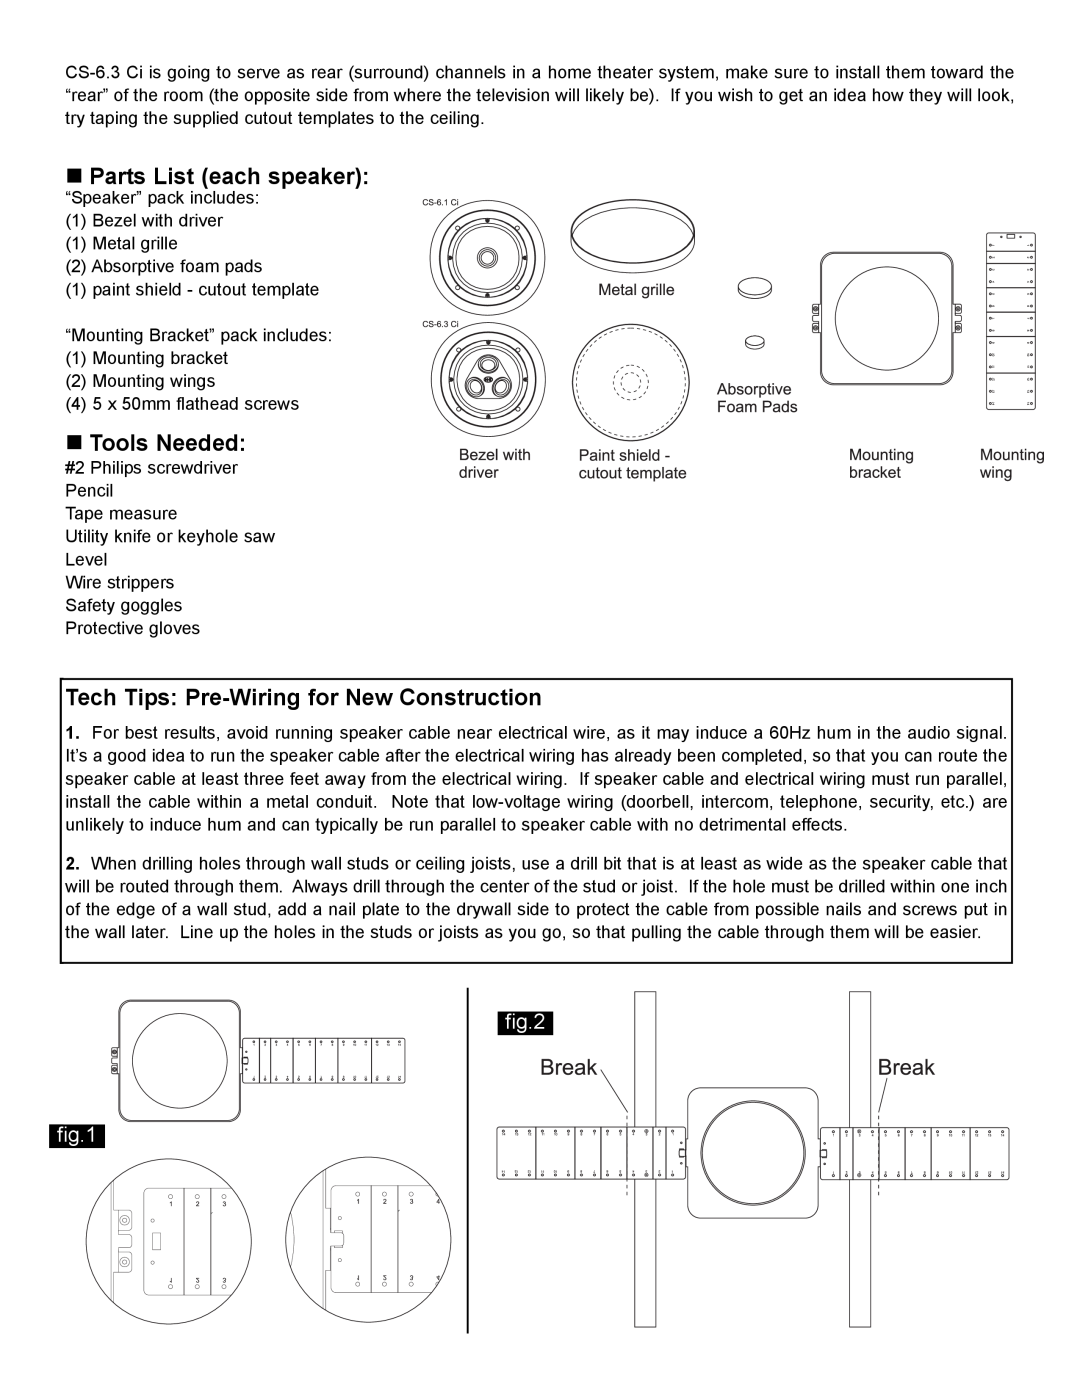 NHT CS-6.3 Ci, CS-6.1 Ci specifications „ Parts List each speaker, „ Tools Needed, Tech Tips Pre-Wiring for New Construction 